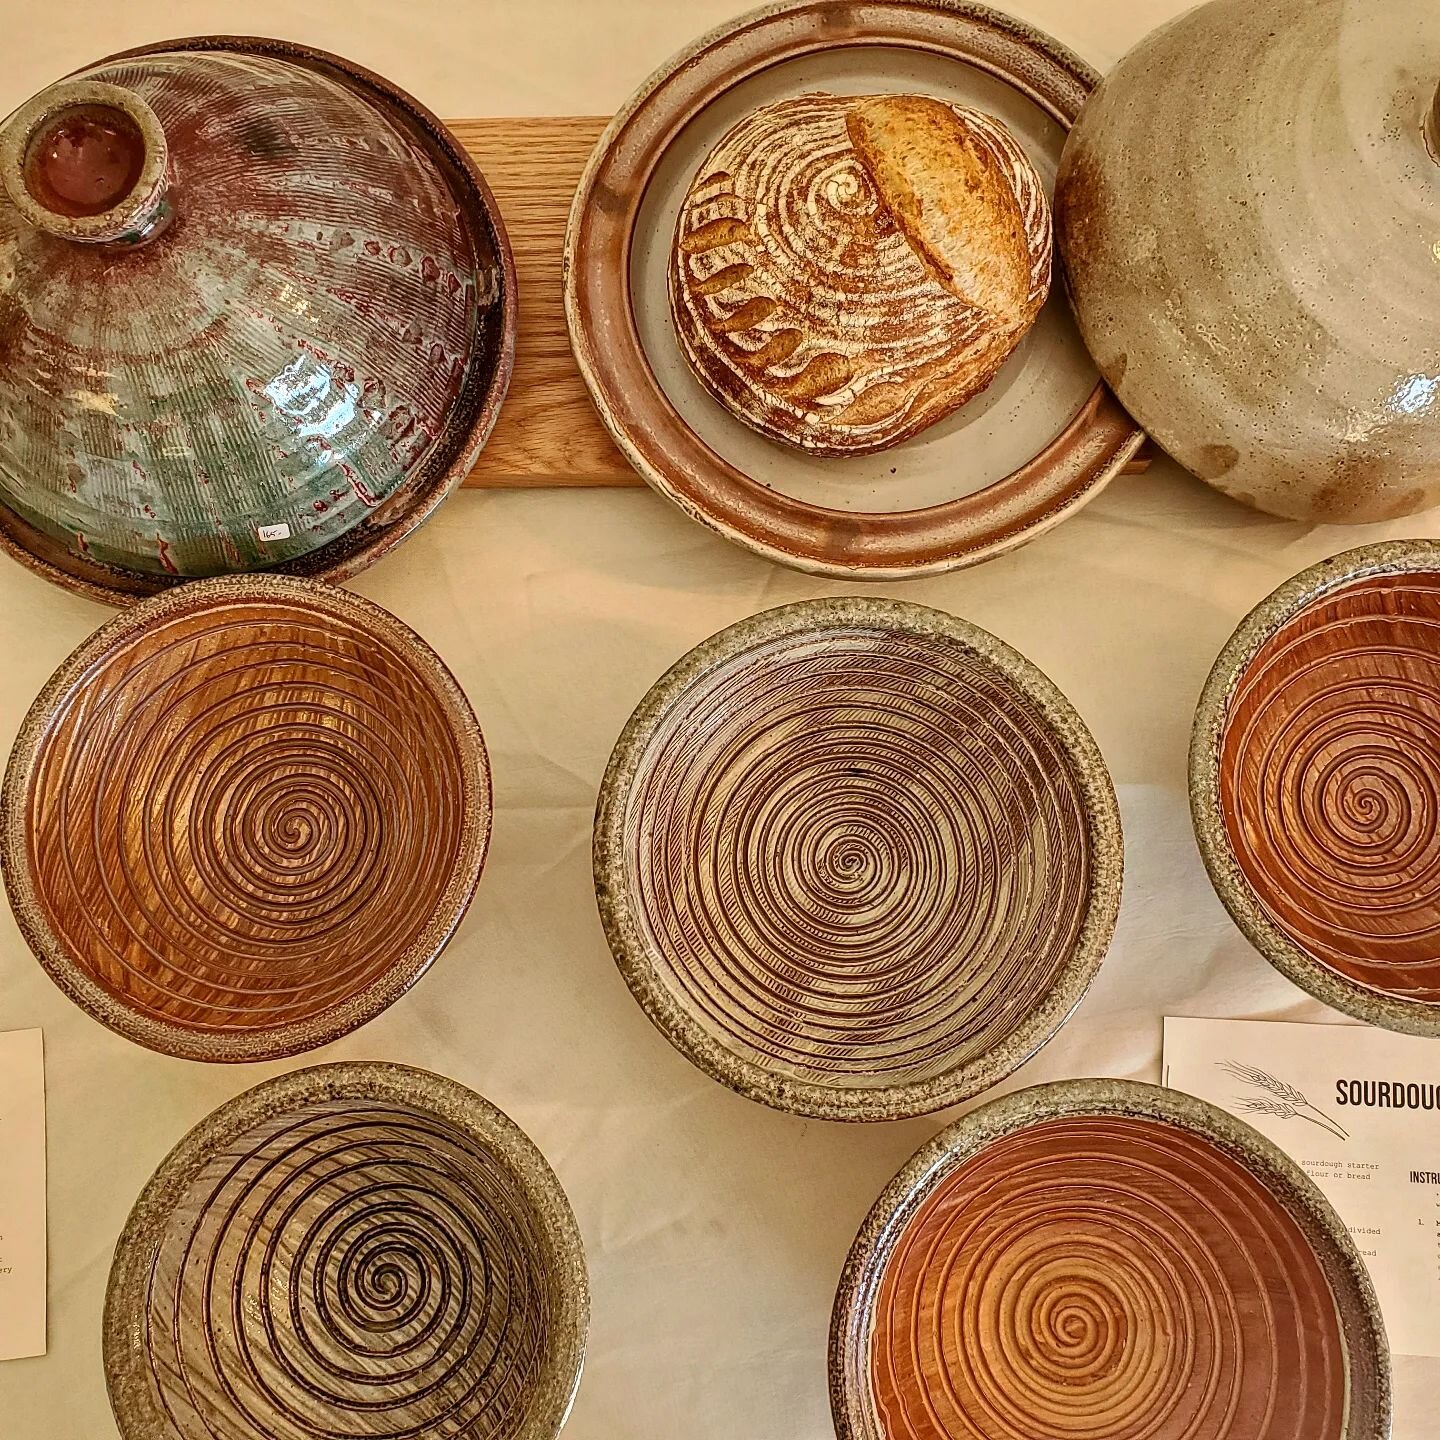 We are open!

Fresh bread, hot cider, and lots of pots.

Studio Maypop
1524 University Drive, Durham

Make a day of it and check out the other potters on the @durhamcountypotterytour 

@studio_maypop #pottery #Durham #northcarolina #freshbread #sourd